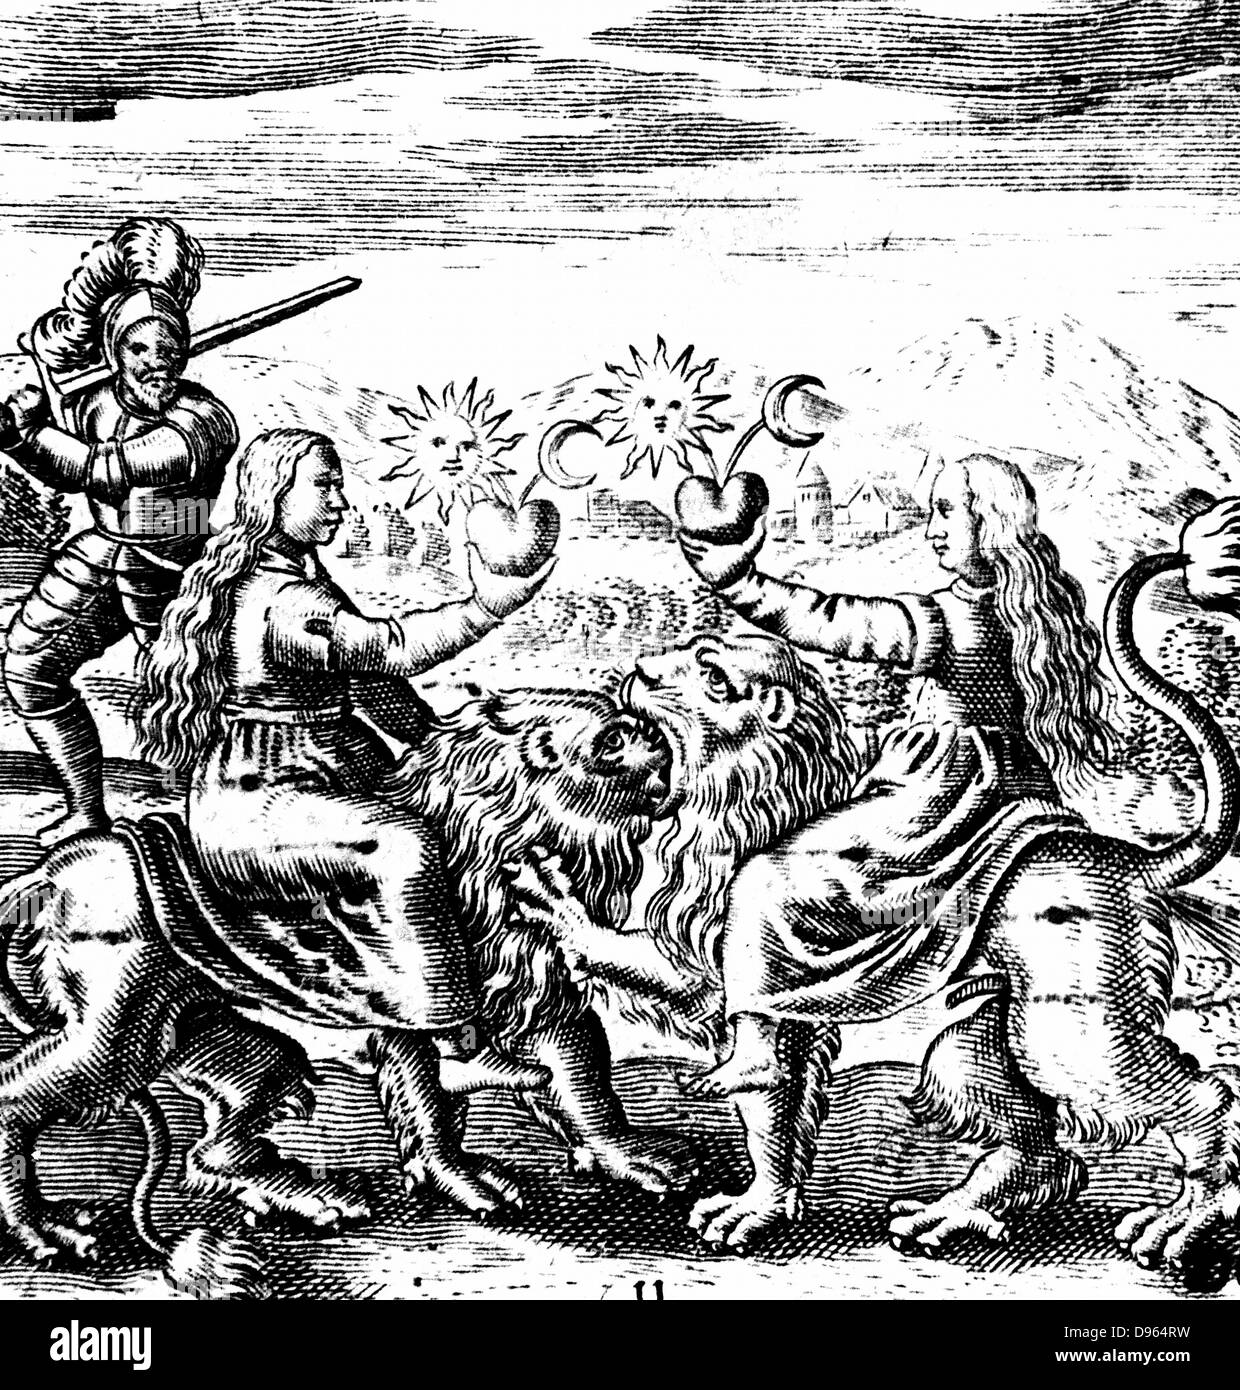 The eleventh key of Basal Valentine, legendary 15th century German monk, symbolising multiplication. Two lions represent sulphur consumed by mercury being transformed, through digestion, into numerous young. From 'Von dem grossen Stein Uhralten' by Basil Valentine (Strasbourg, 1651). Engraving. Stock Photo